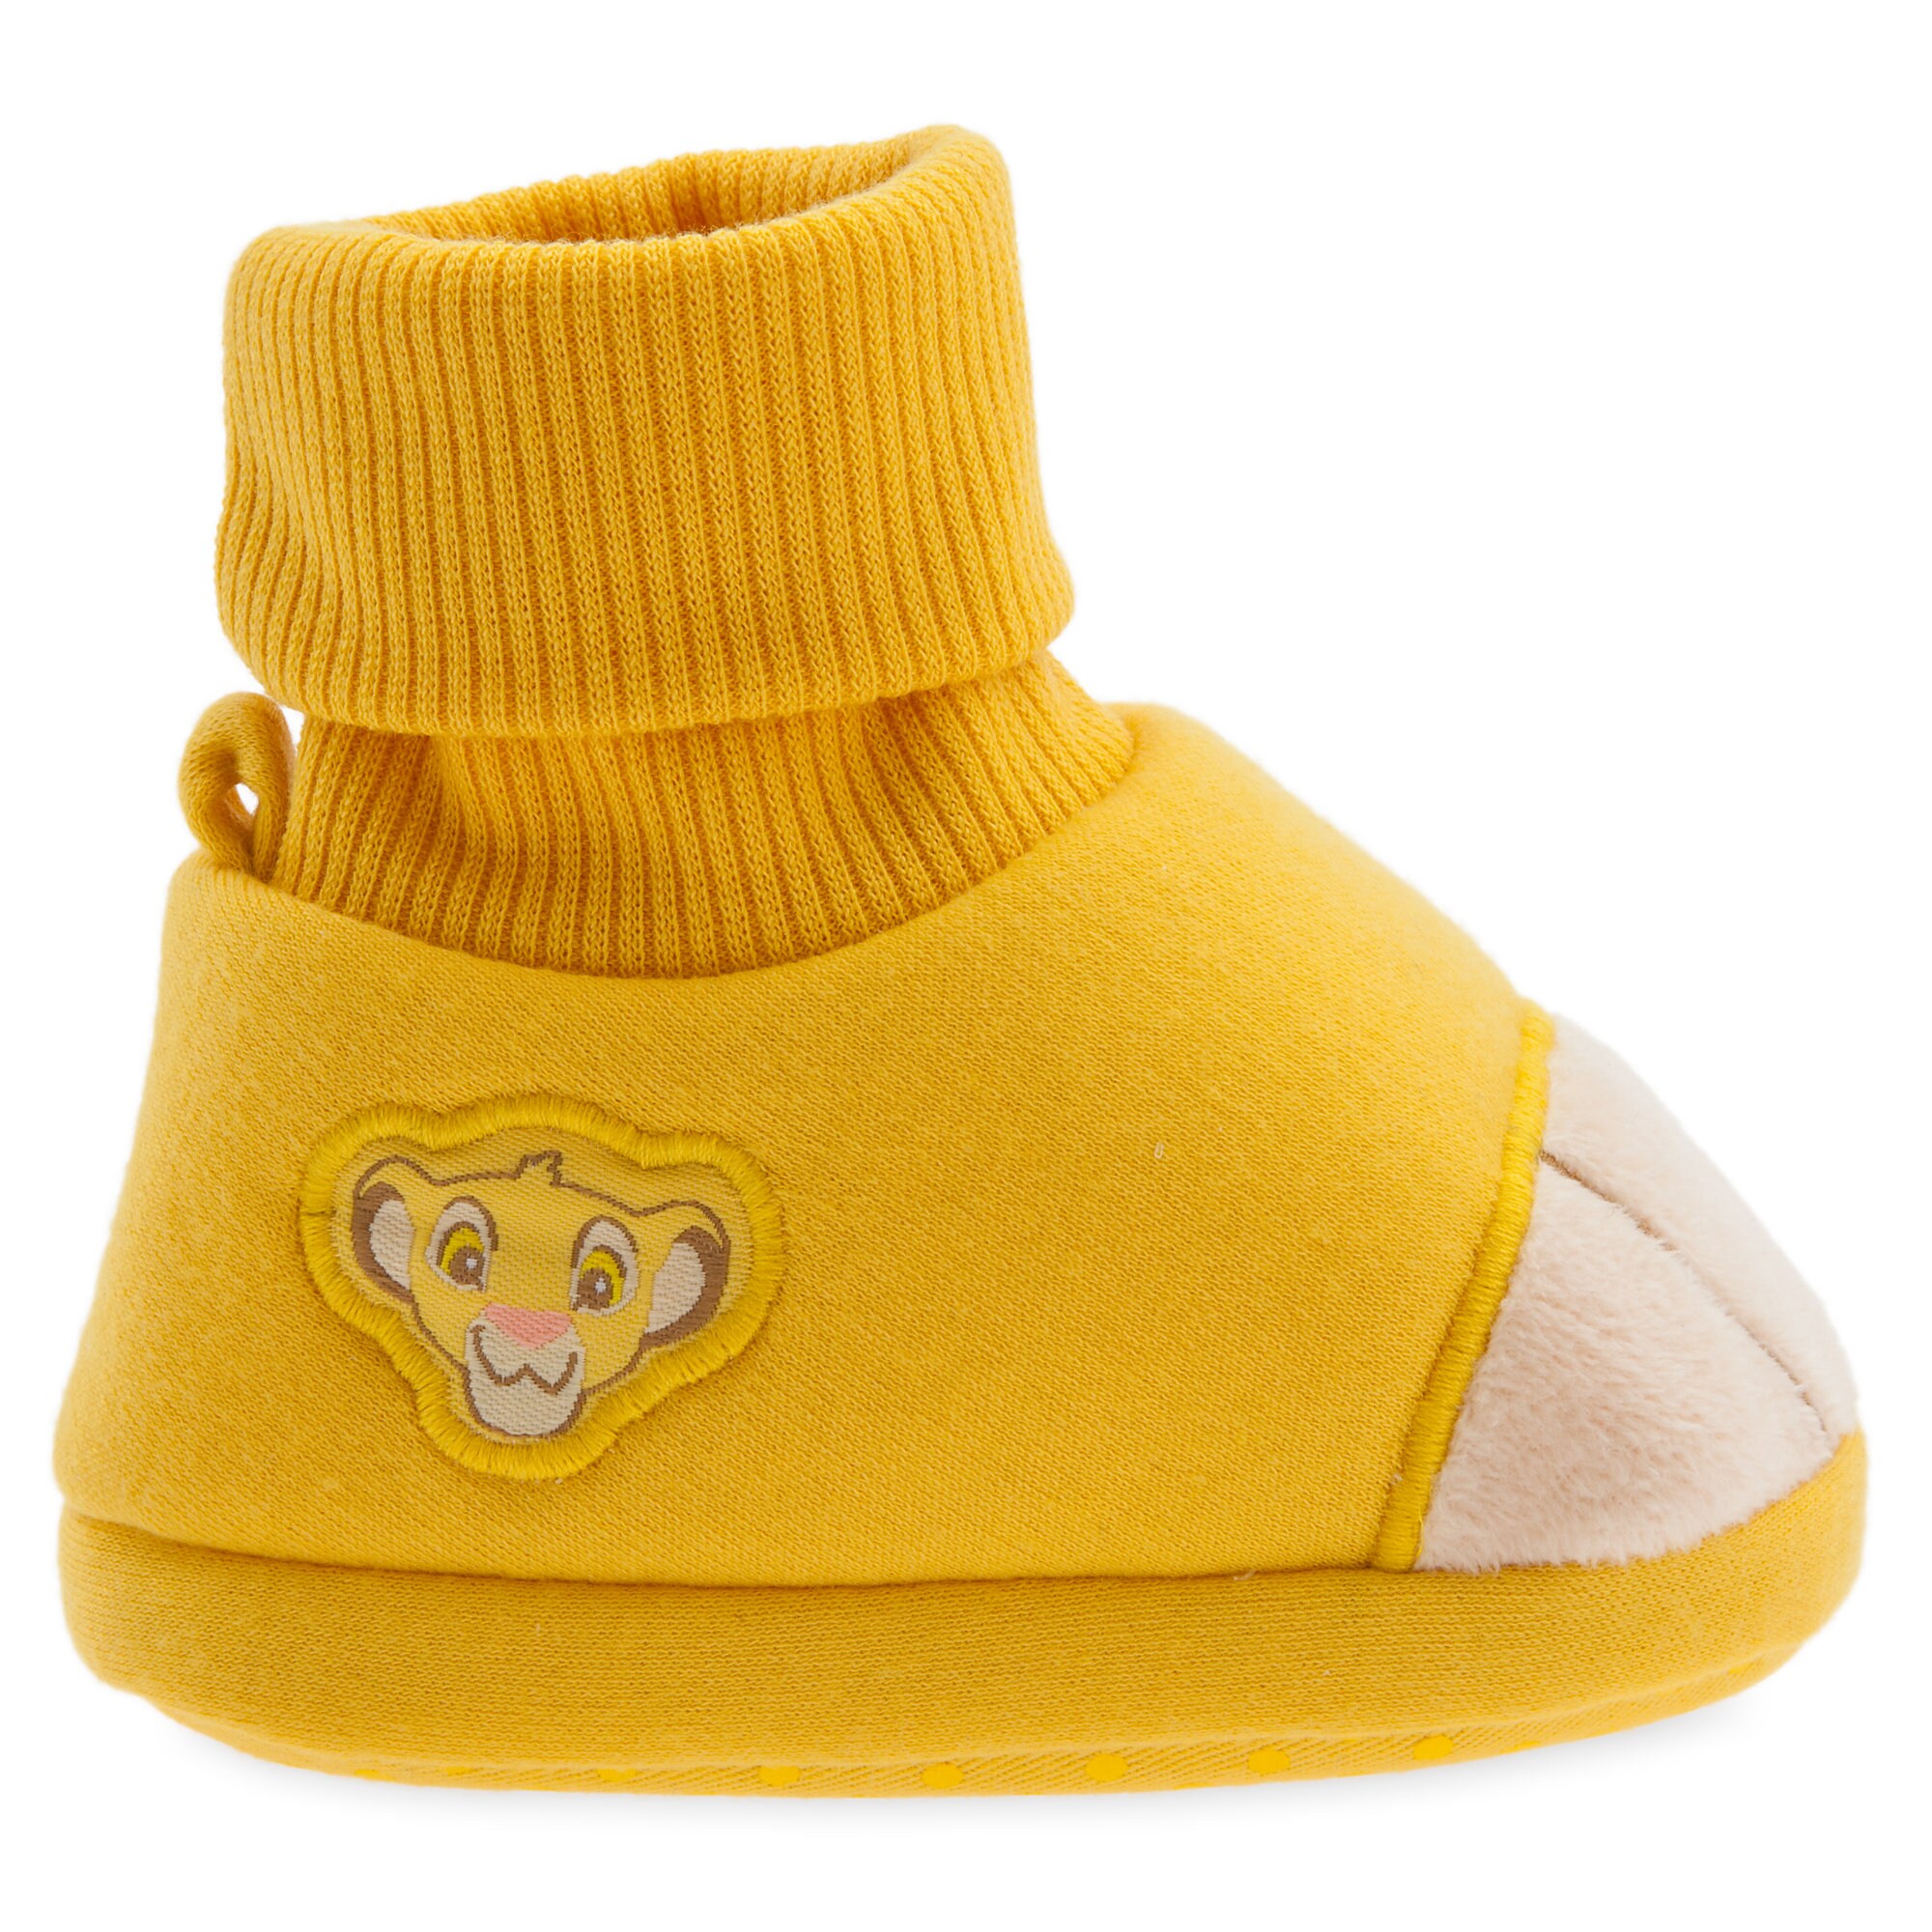 Simba Costume Shoes for Baby released today – Dis Merchandise News